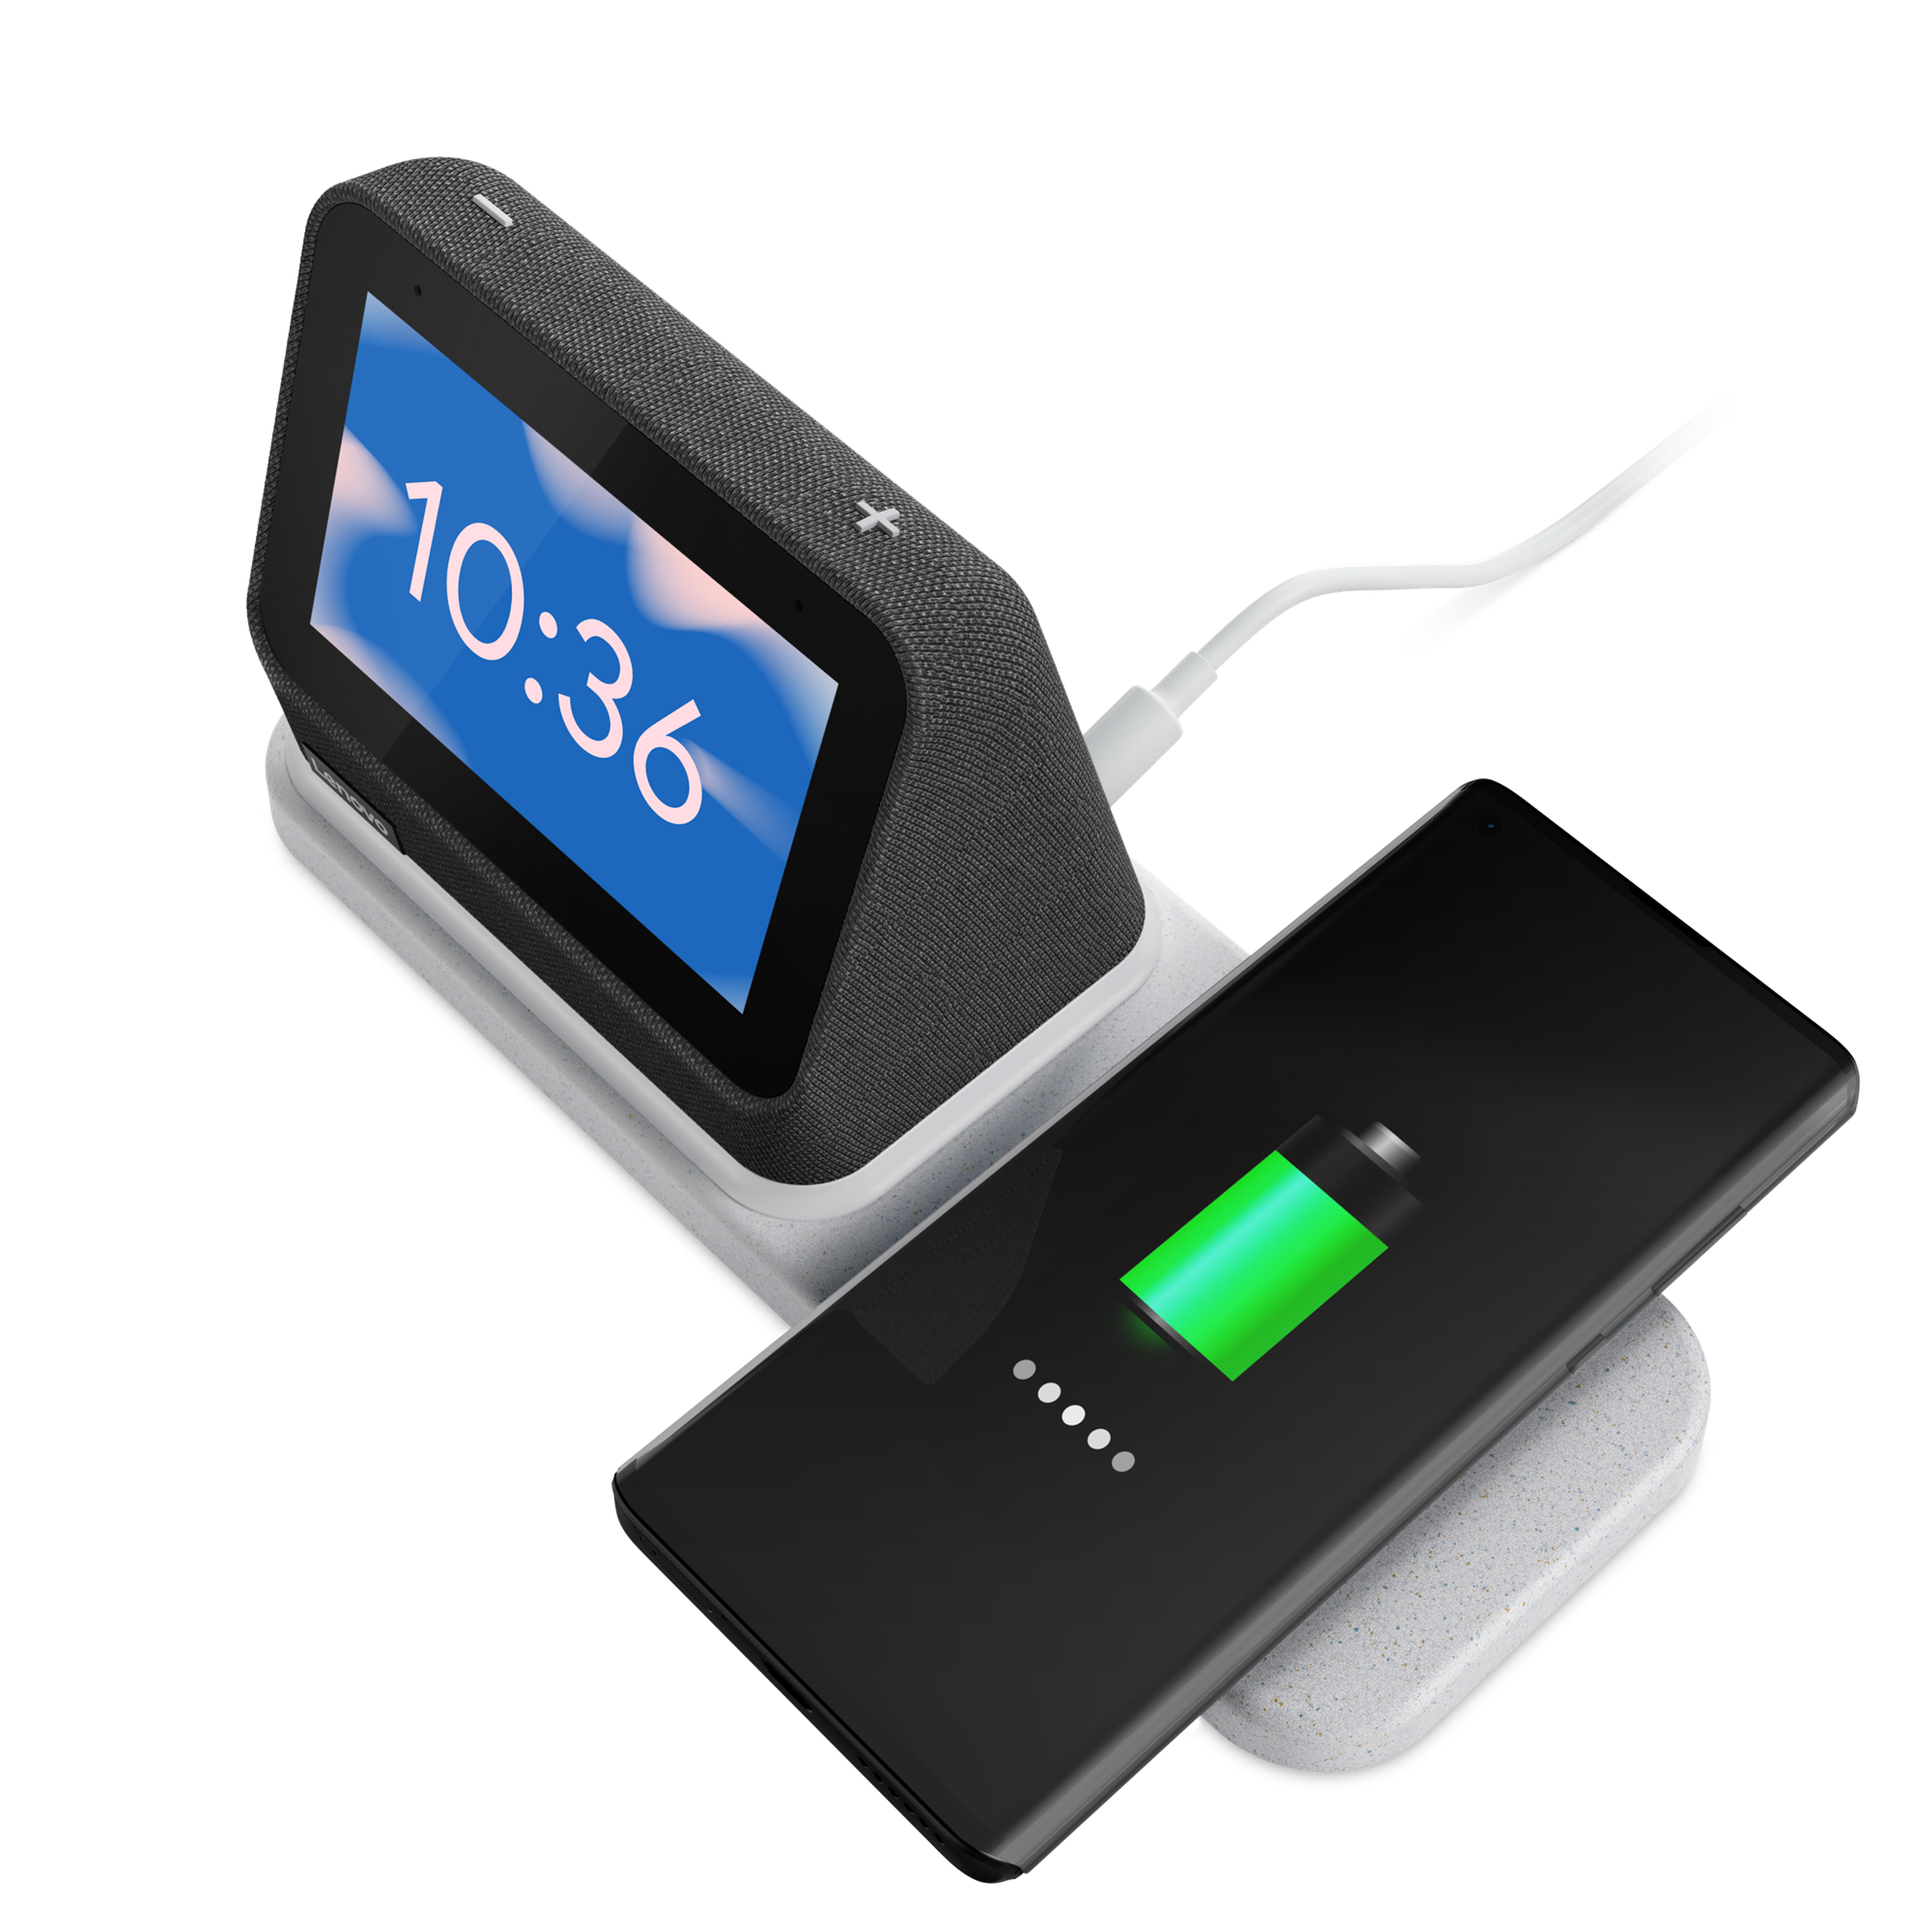 The Lenovo Smart Clock on top of a wireless charger that charges a smart phone. The screen displays the time 10:36 on a blue background with clouds.